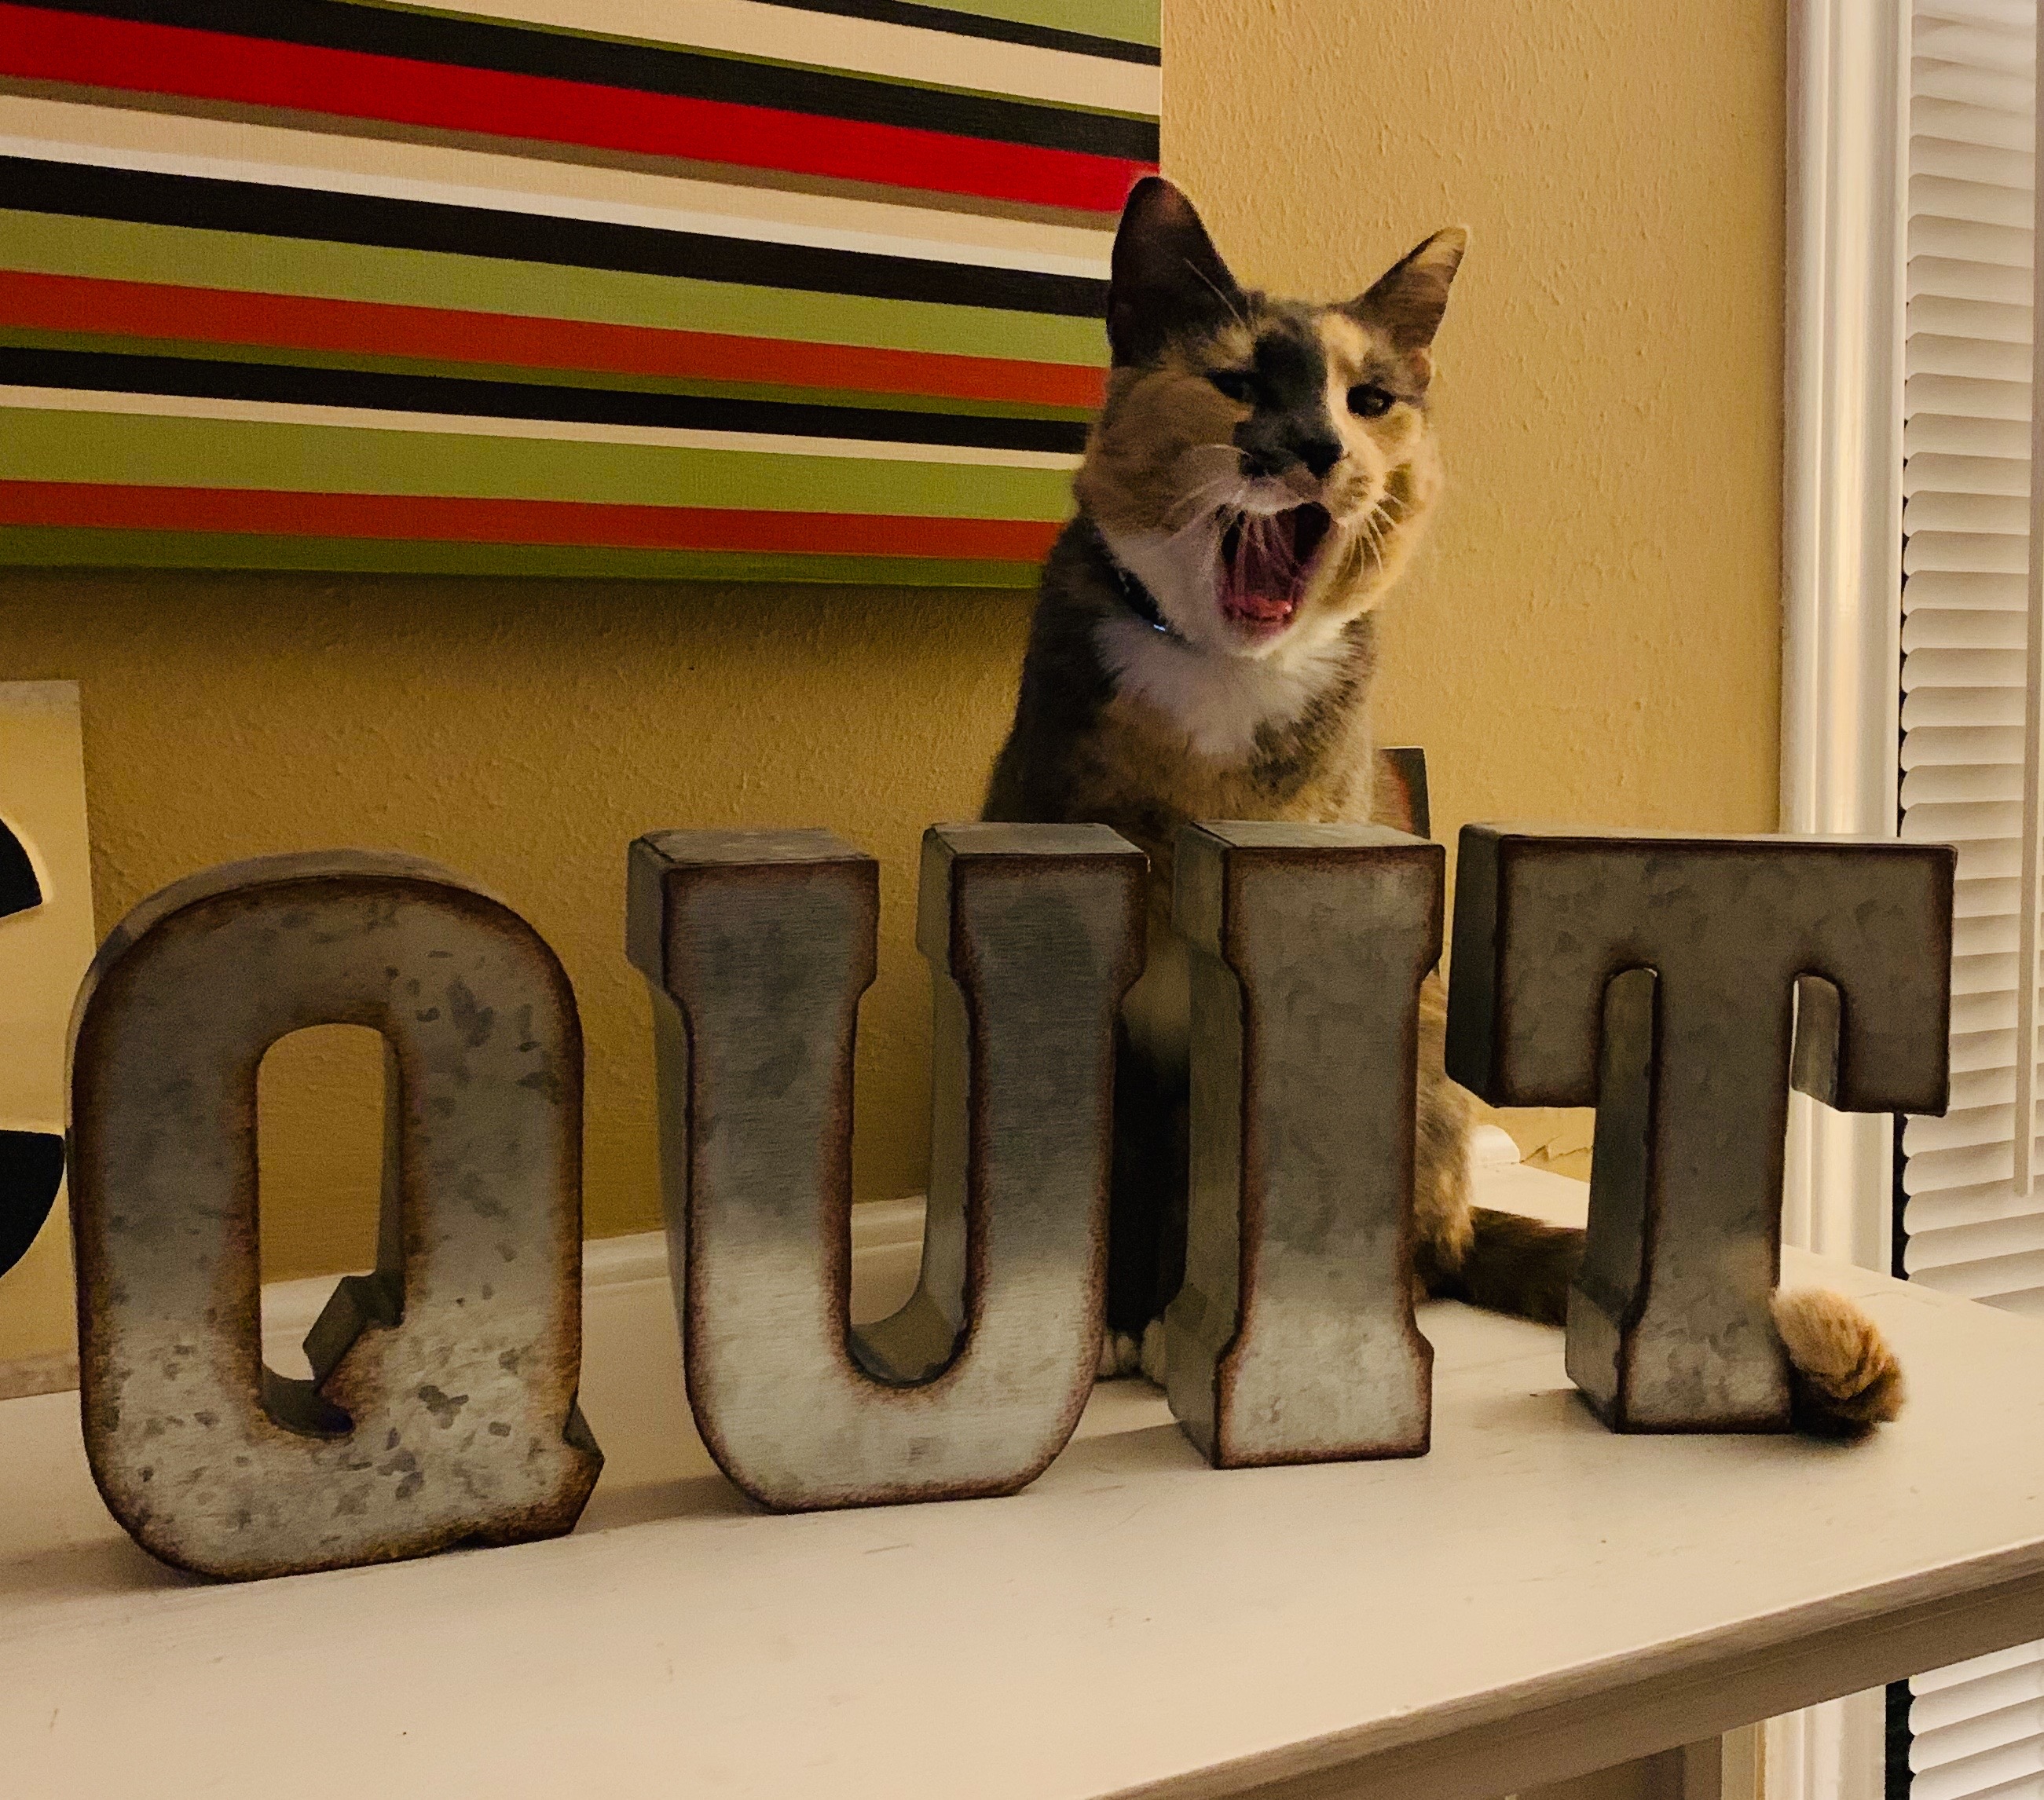 Letters on shelf spelling "Quit" with a yawning cat in the background.